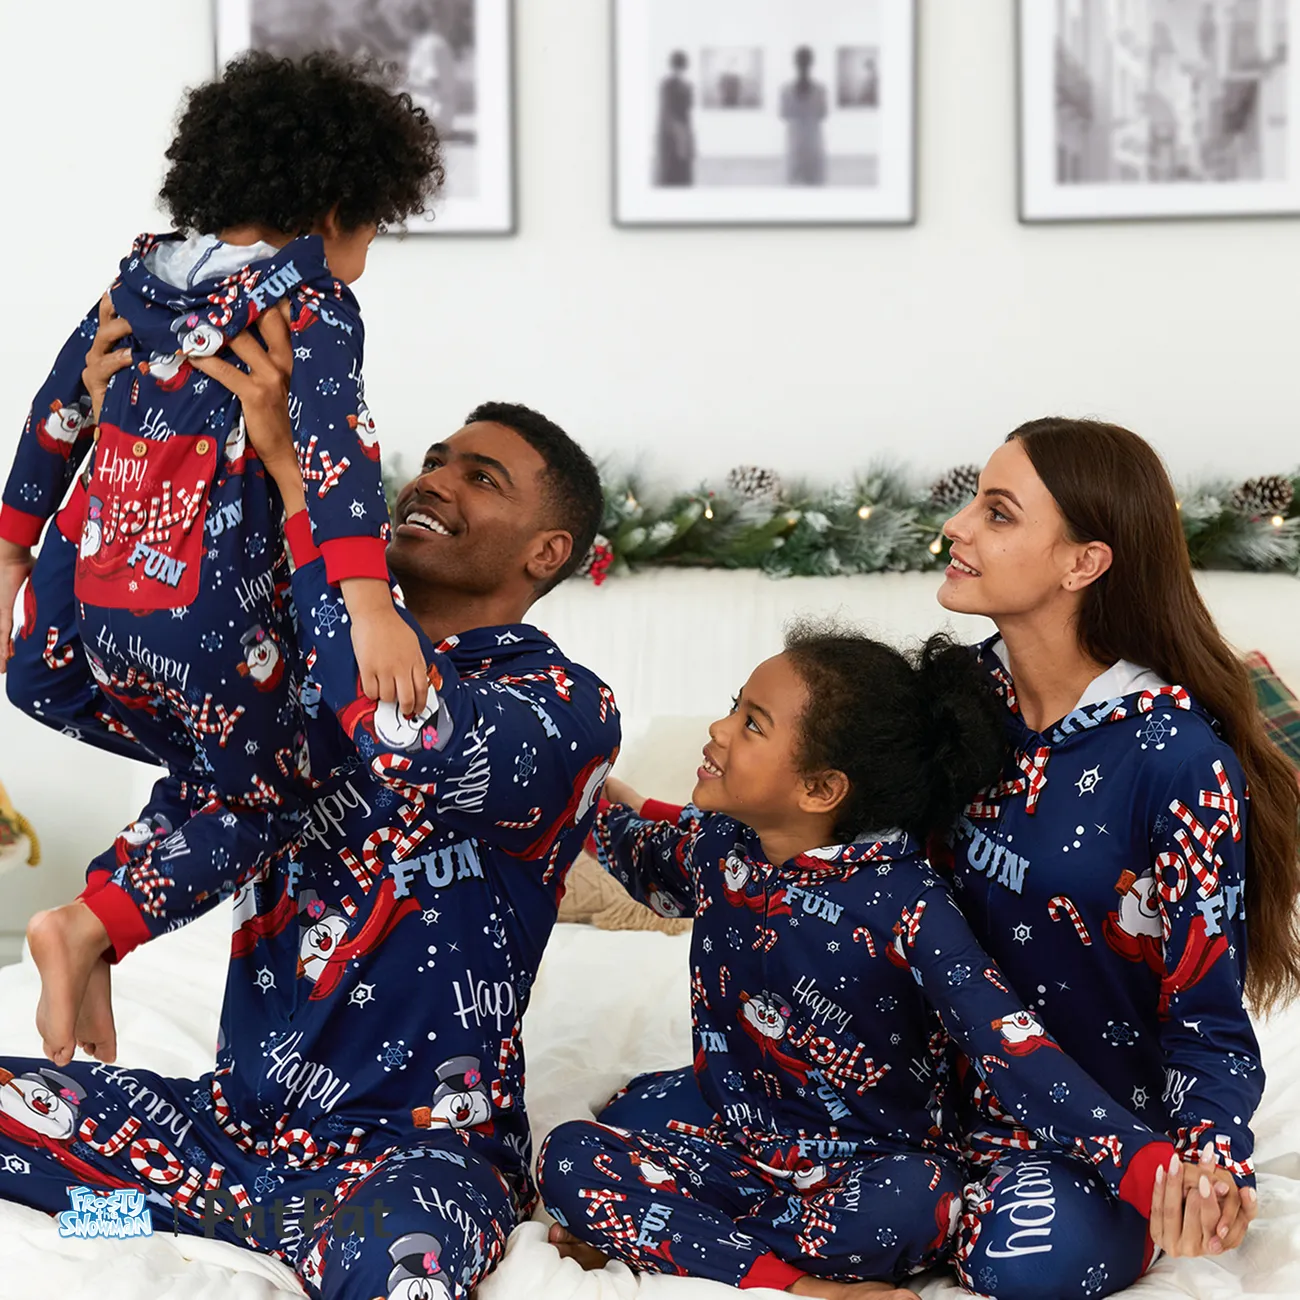 Frosty The Snowman Family Matching Christmas Allover Zip-up Hooded Onesies Pajamas(Flame Resistant) Deep Blue big image 1